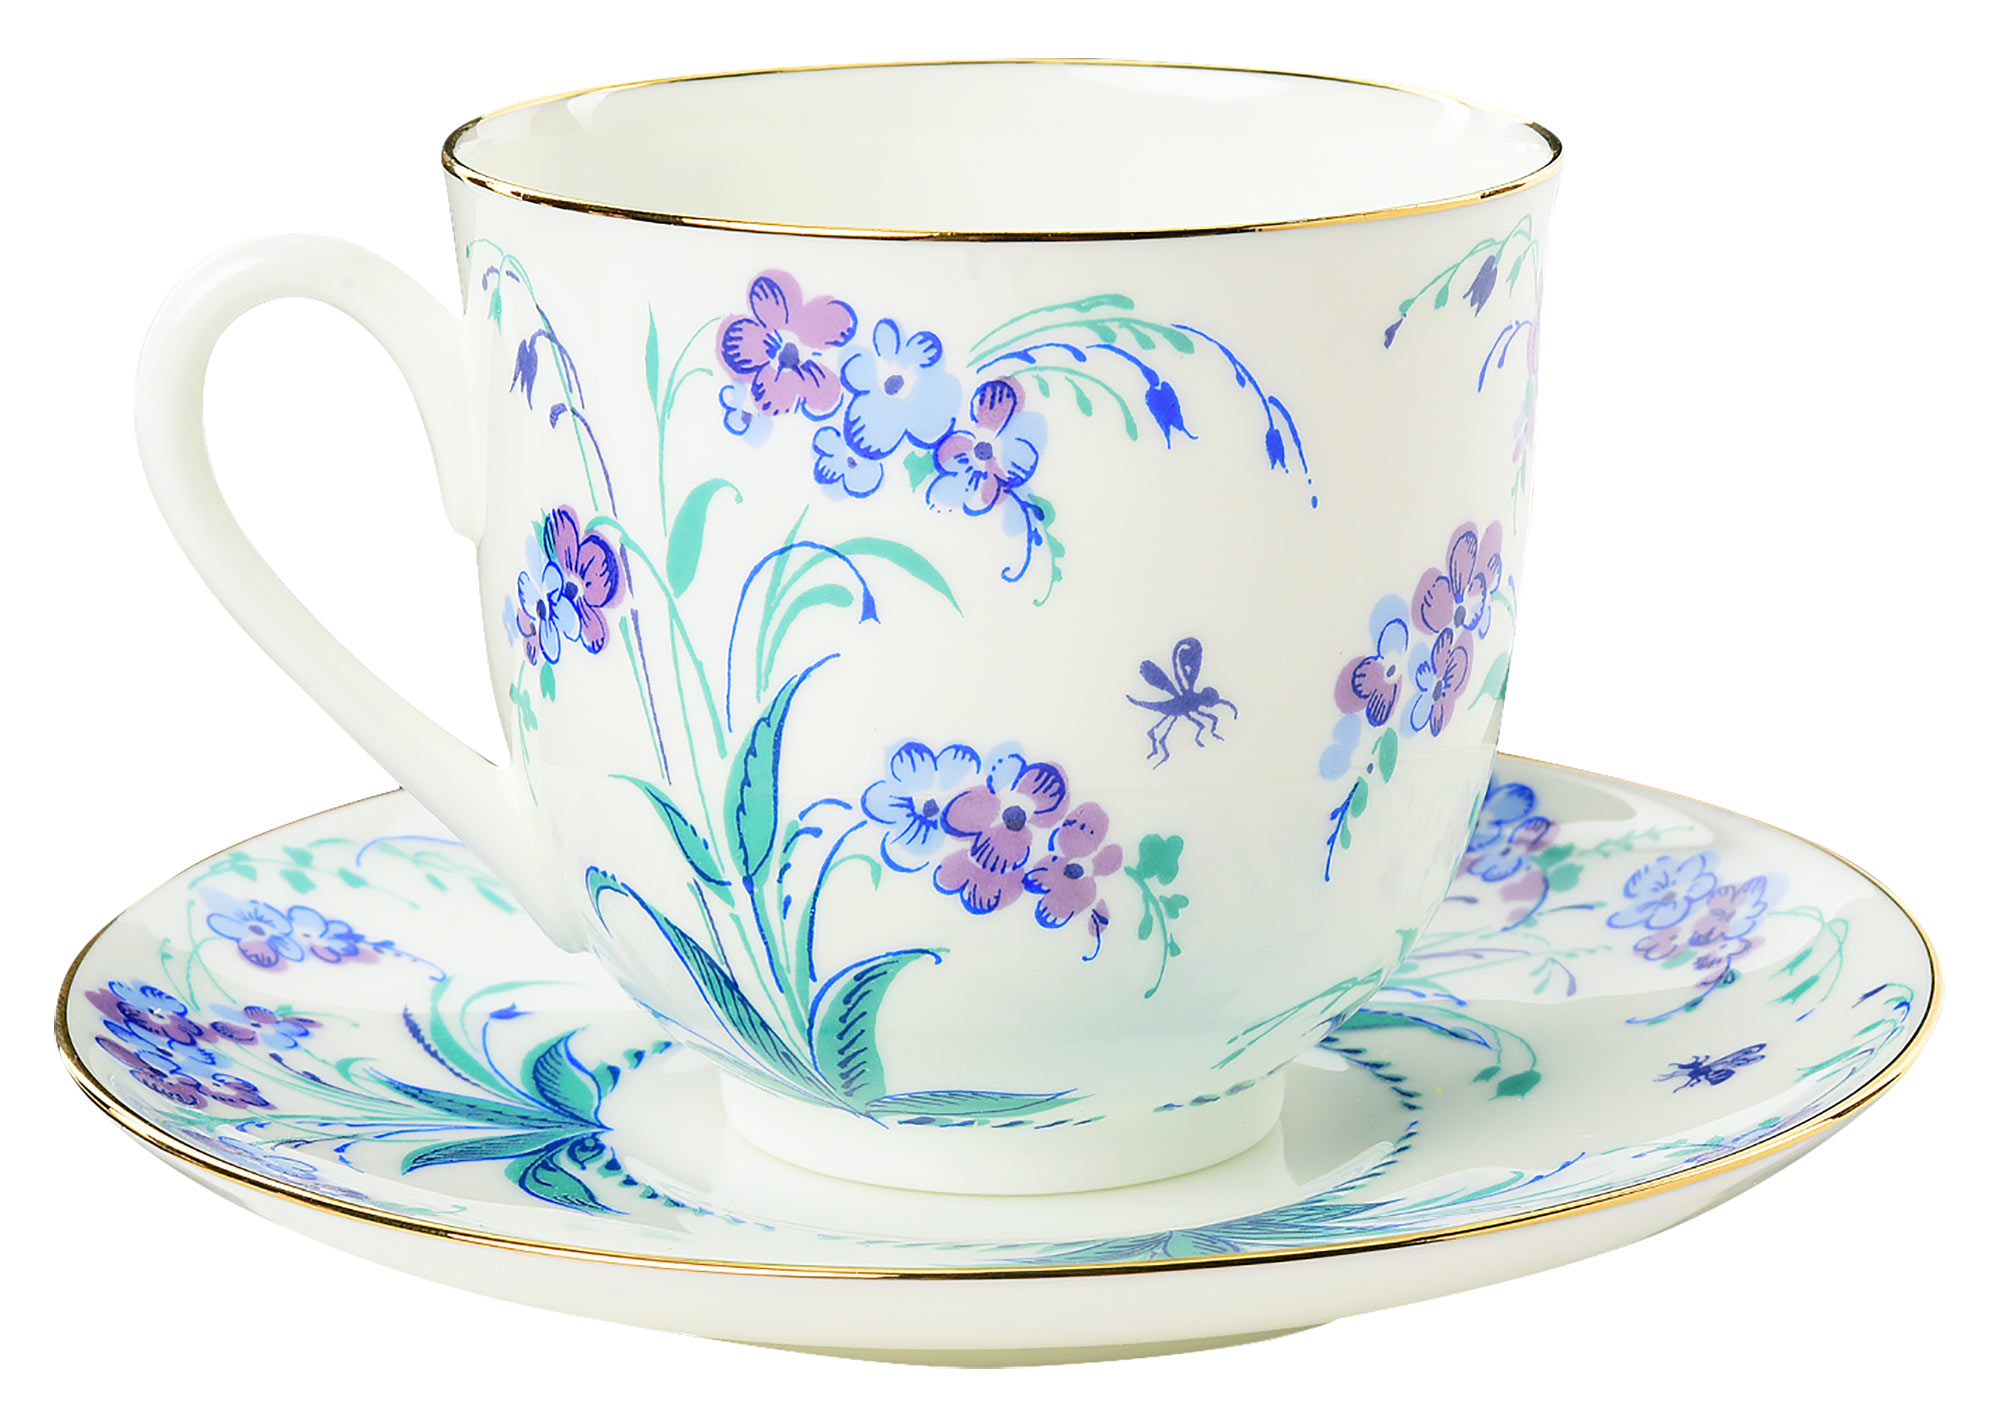 Buy Forget-Me-Not Bone China Coffee Cup and Saucer at GoldenCockerel.com